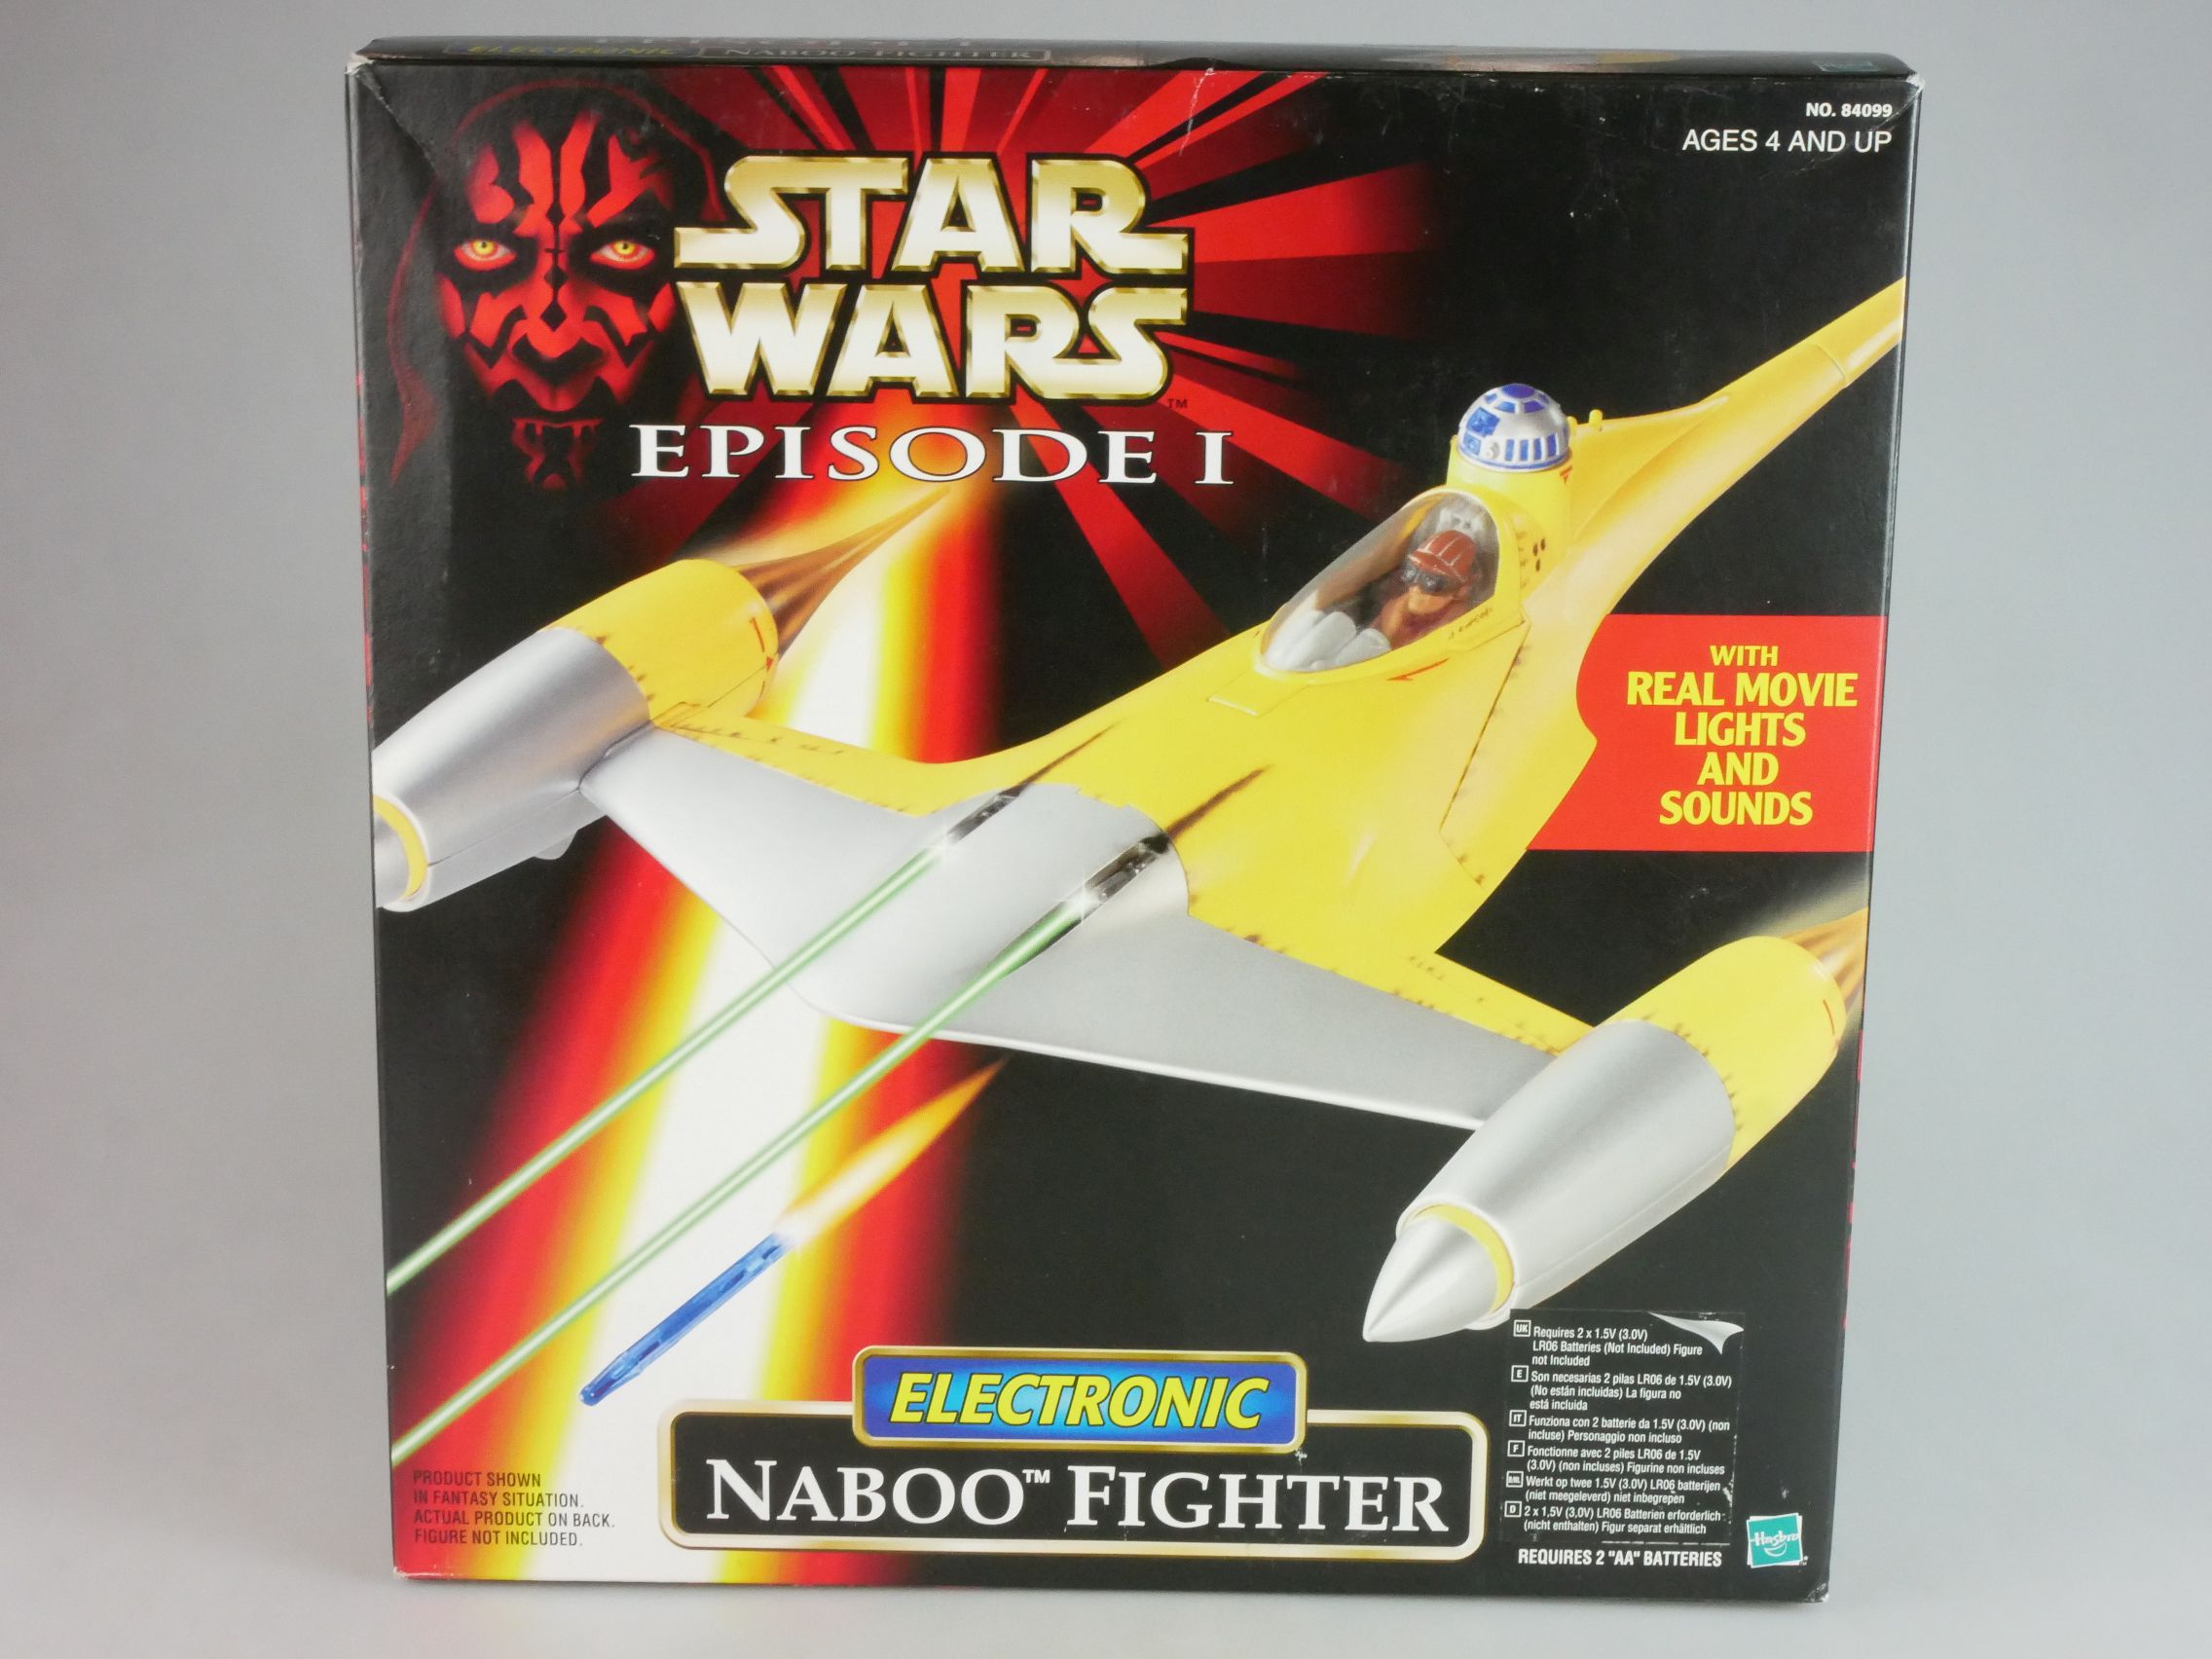 Hasbro 1999 Star Wars Episode 1 Electronic NABOO FIGHTER 84099 Box 125463